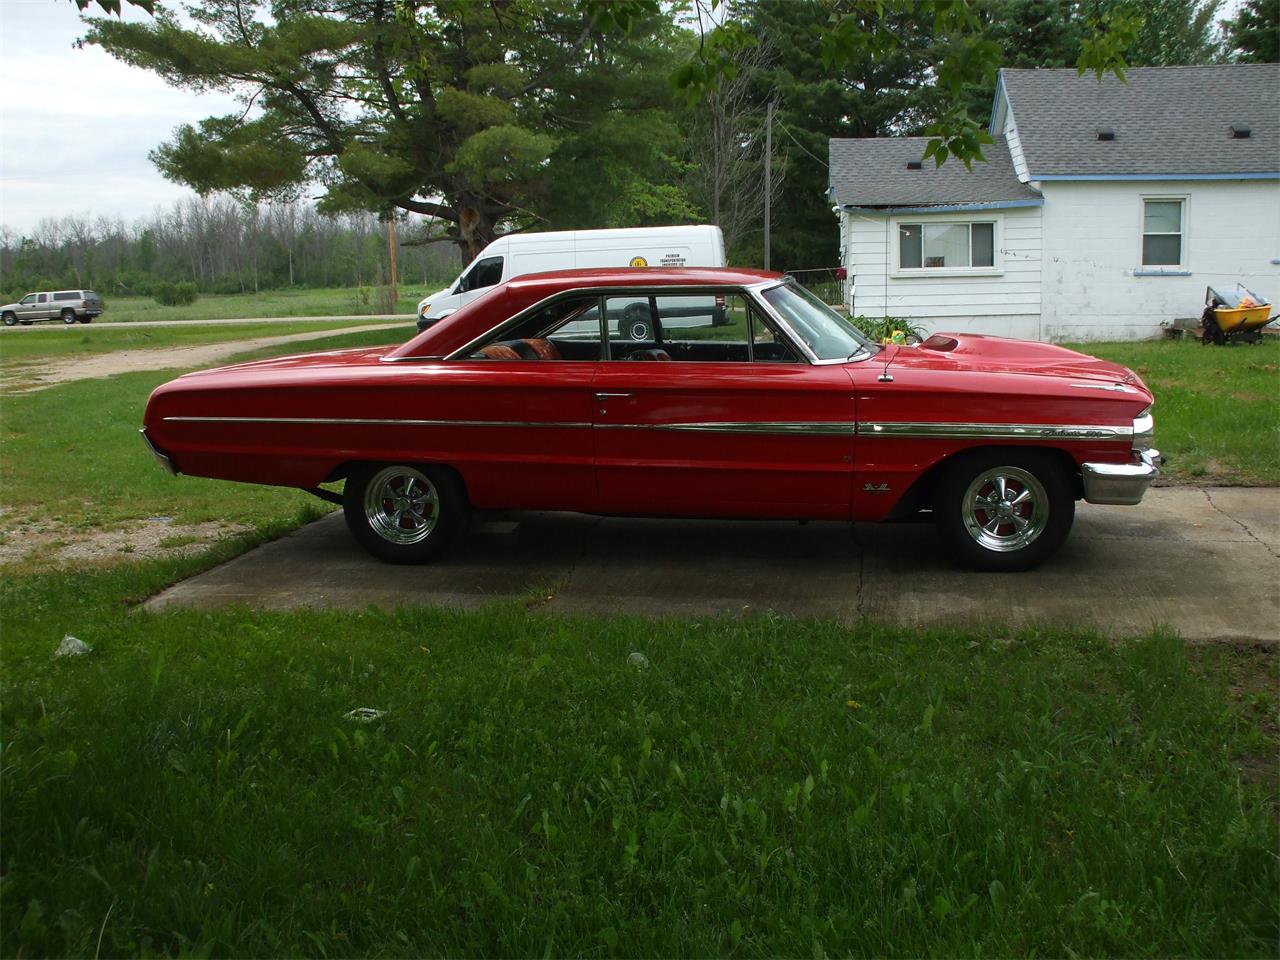 1964 Ford Galaxie 500 for Sale | ClassicCars.com | CC-971260